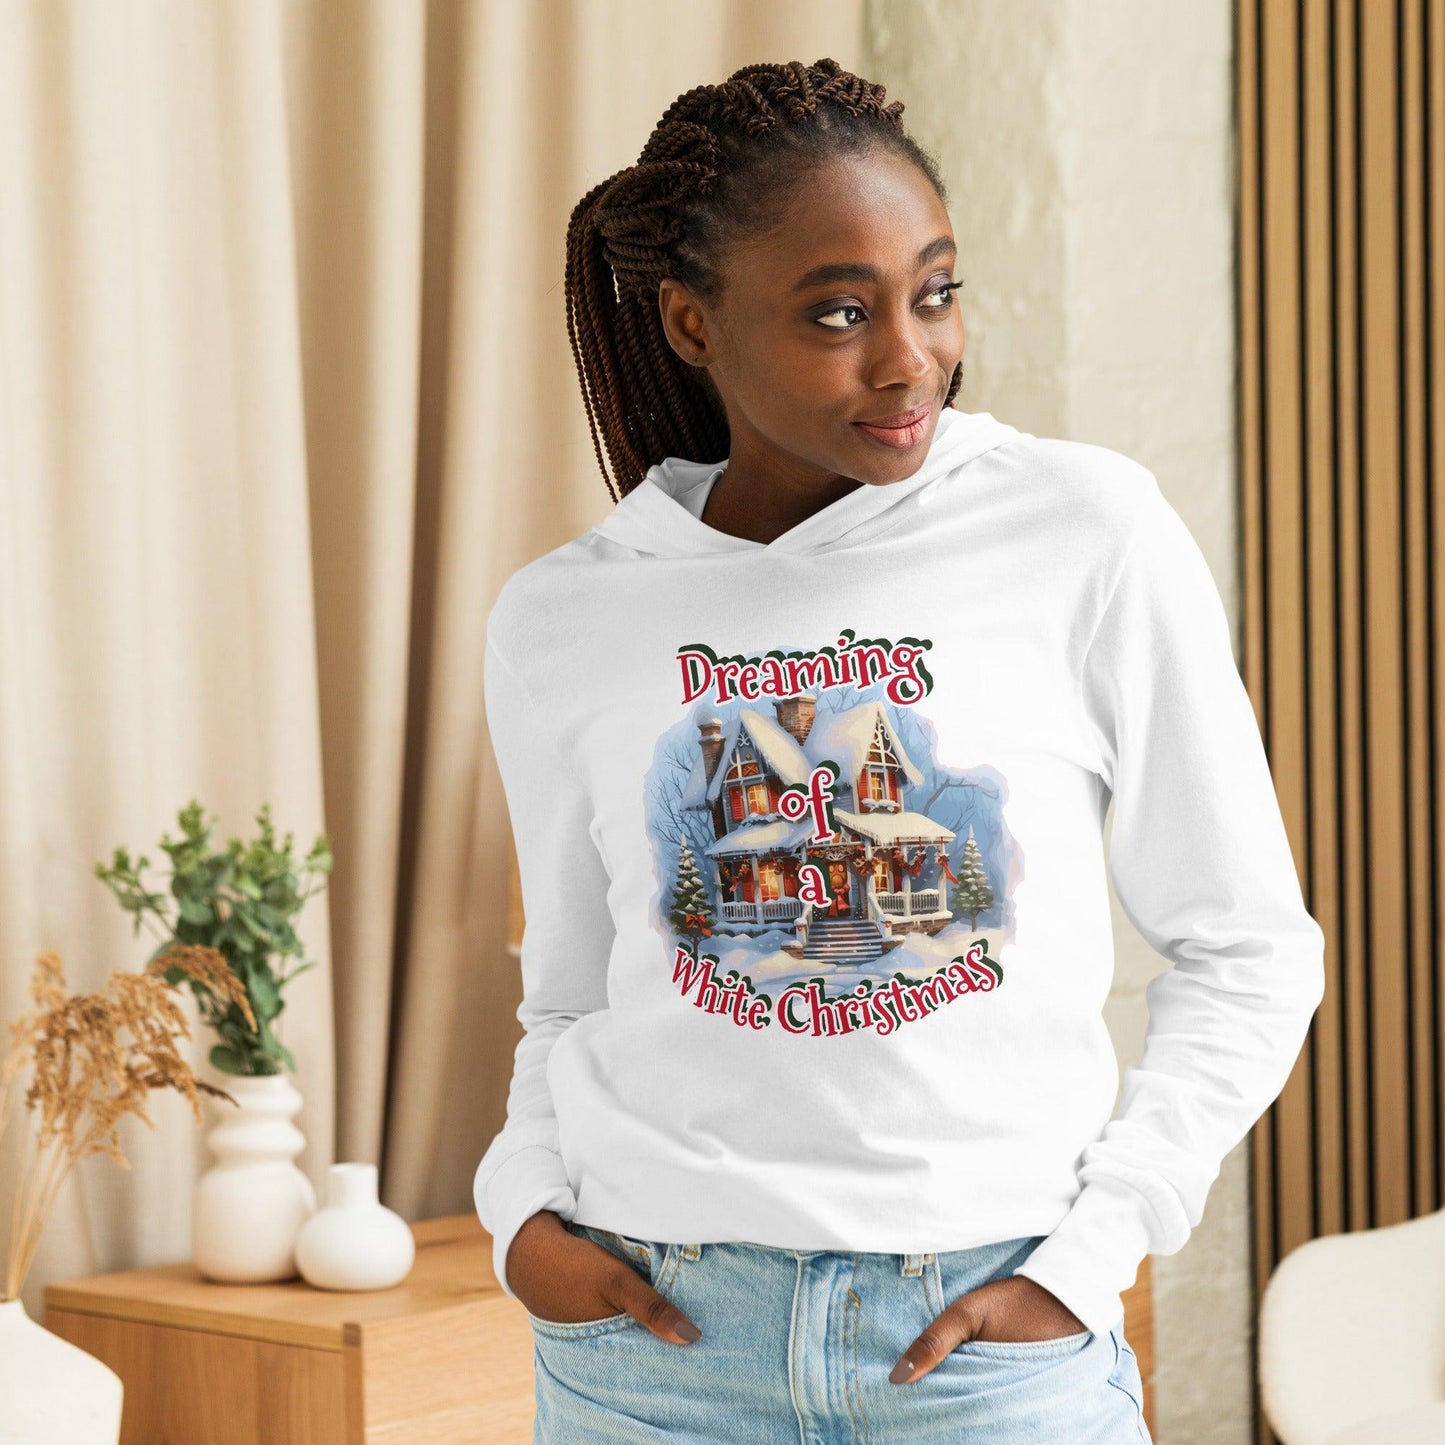 Dreaming of a White Christmas Hooded long-sleeve tee